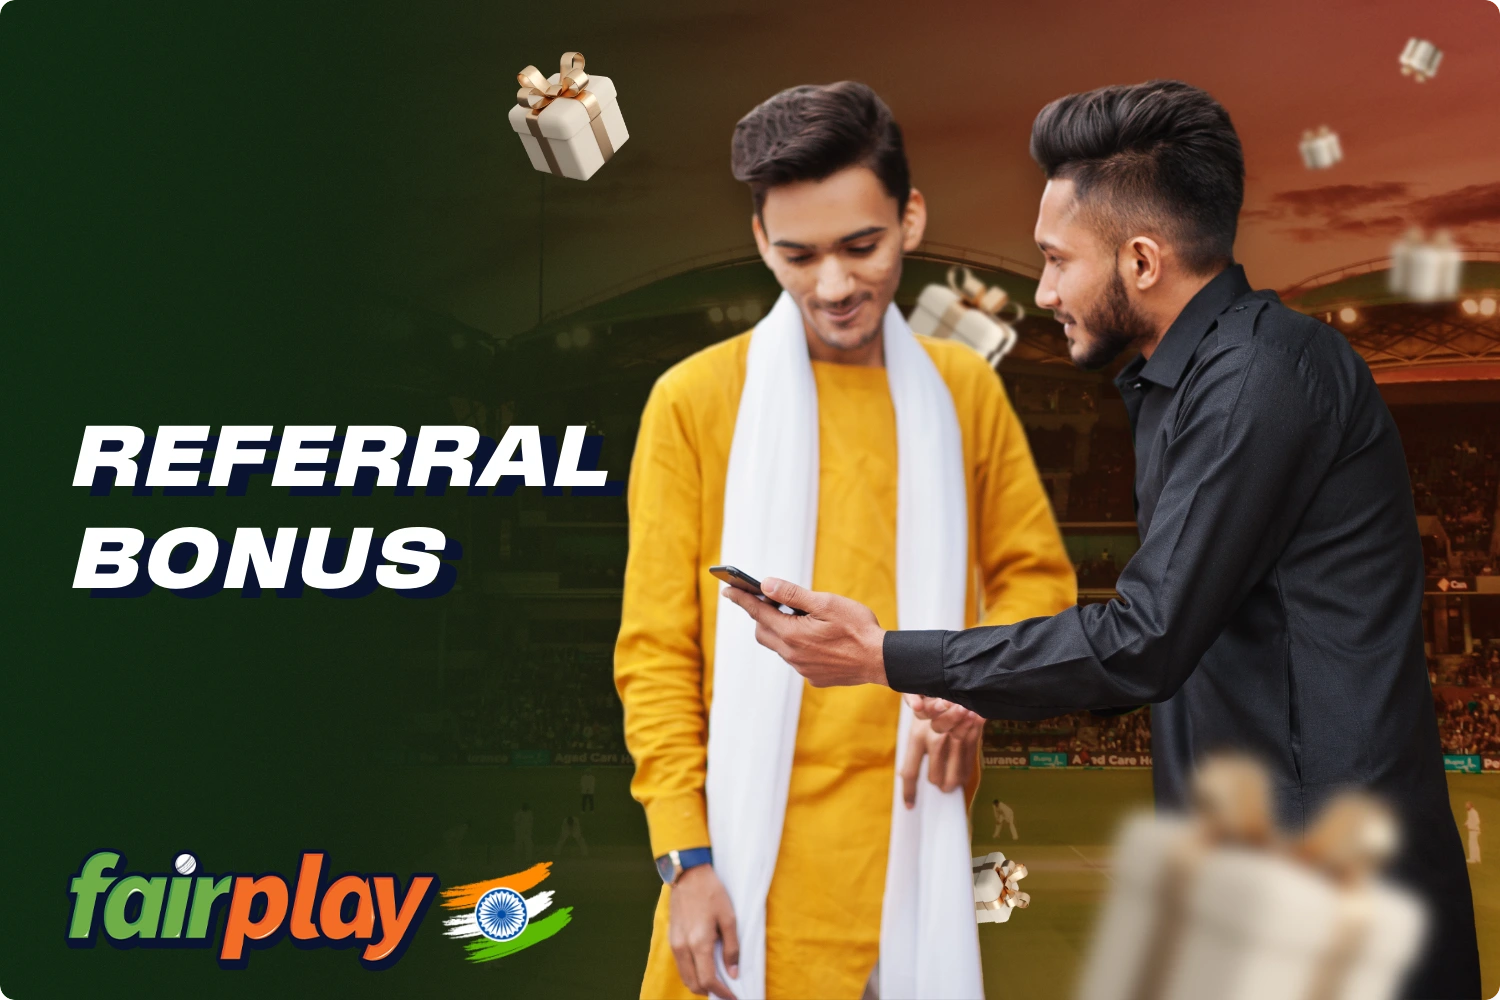 When you invite other users to Fairplay, you will receive a referral bonus